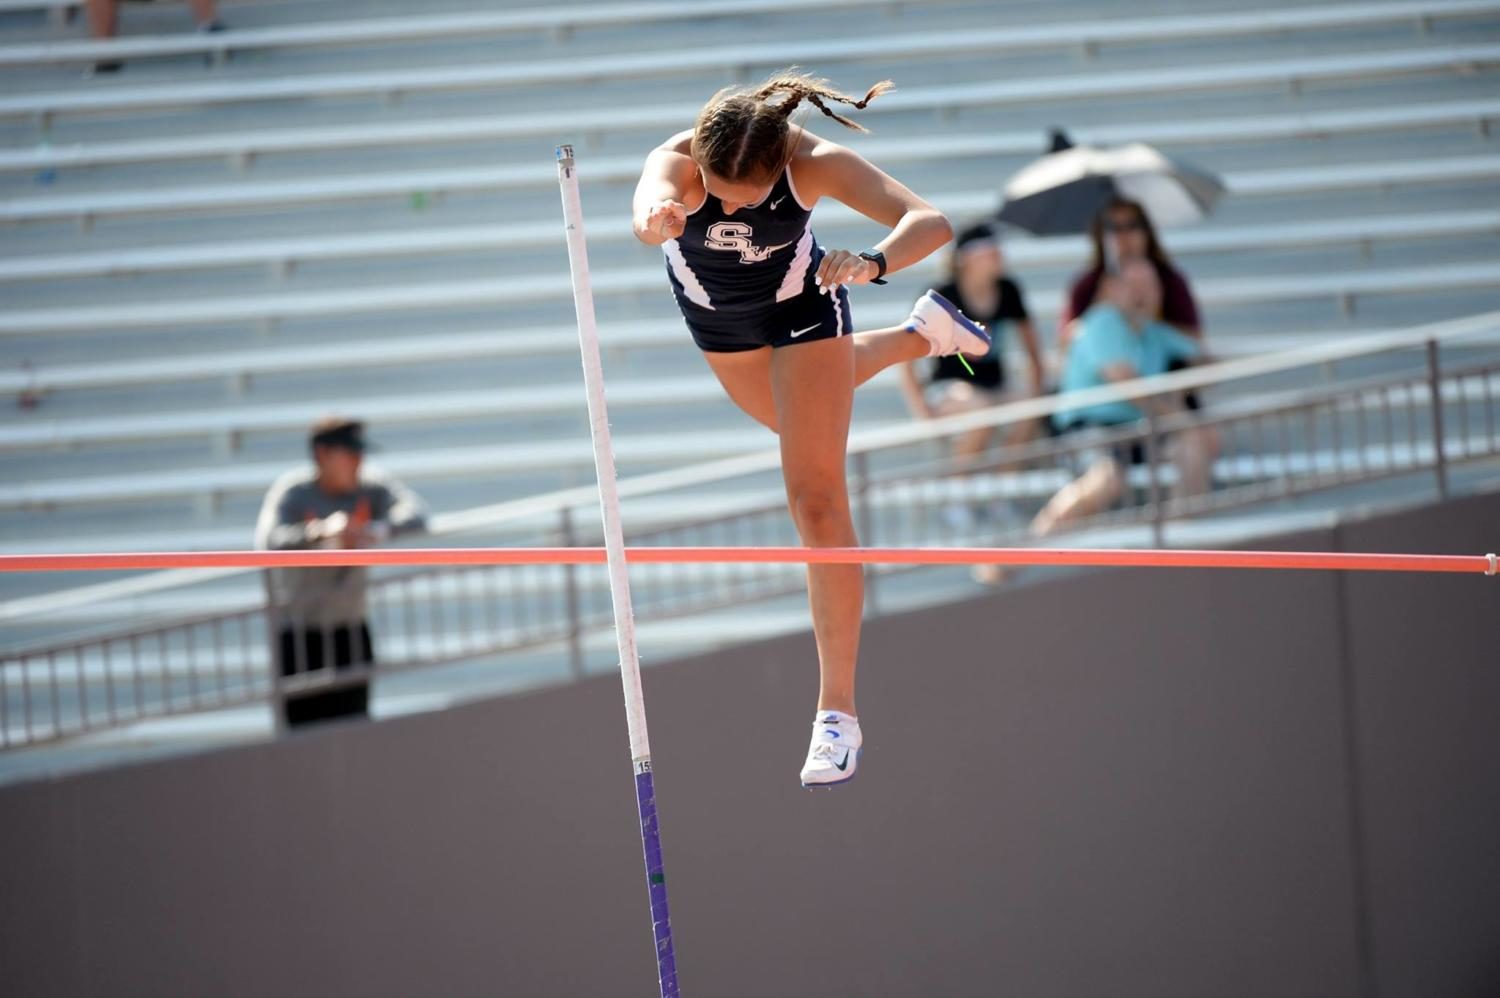 Senior Colleen Clancy clears 13 feet 6 inches to win gold at UIL 6A State Championships